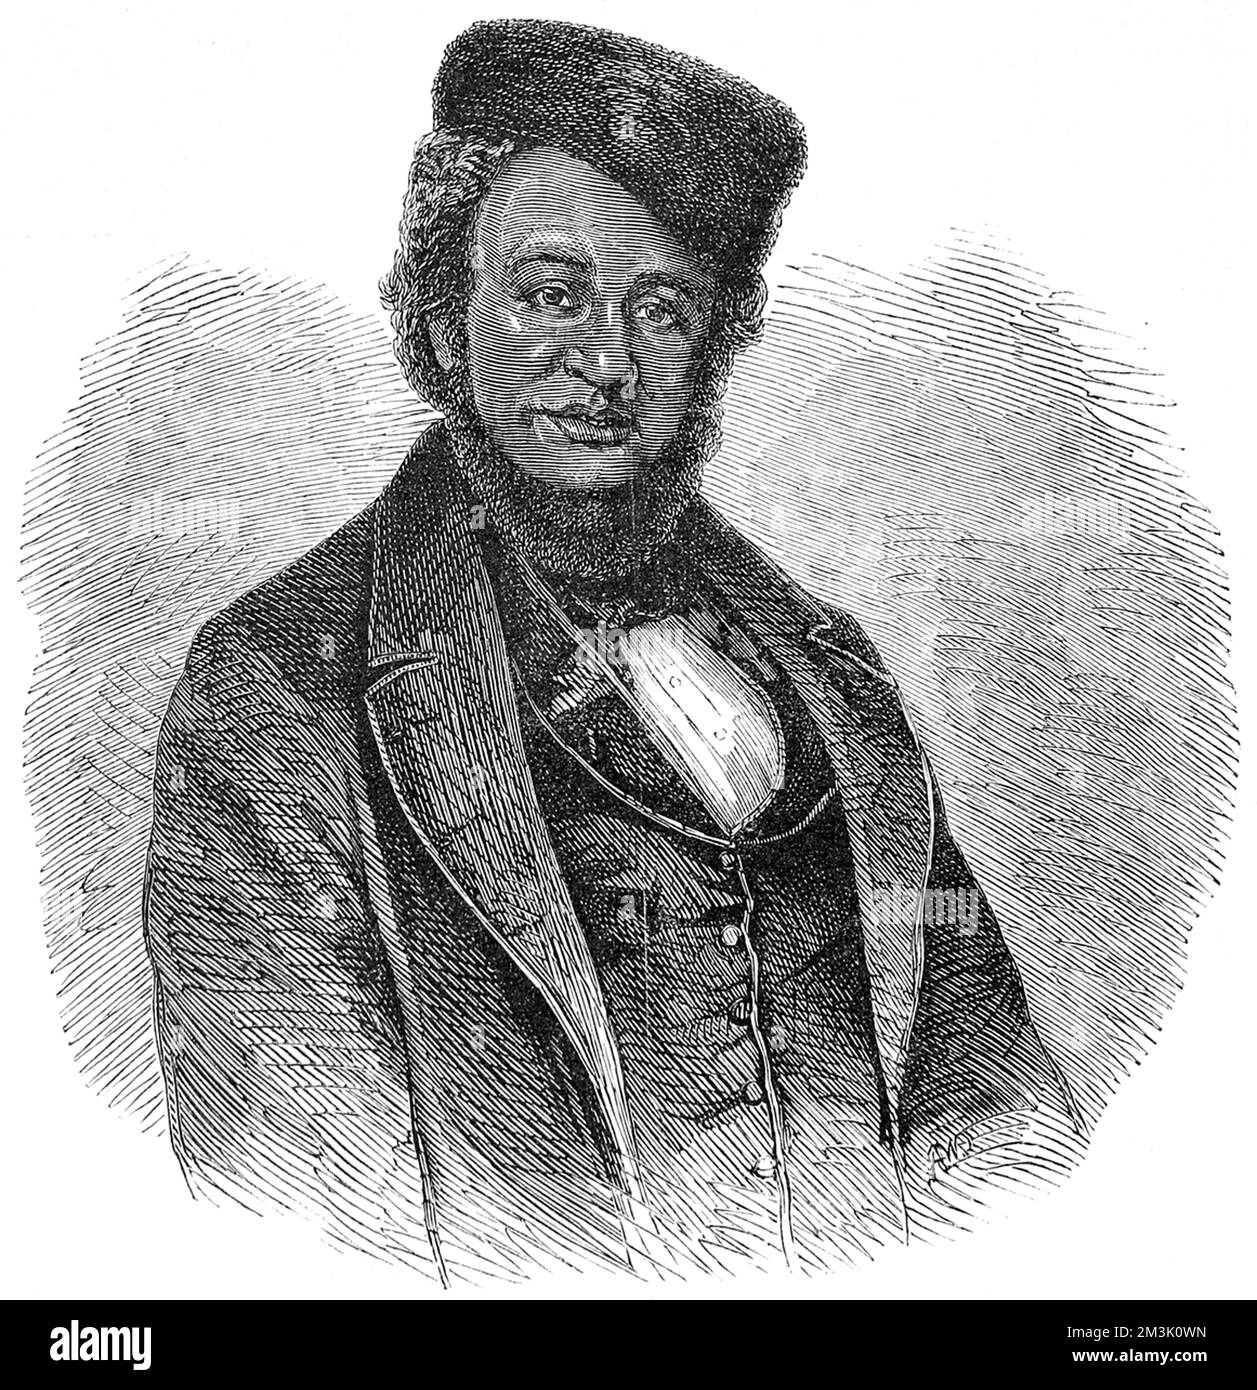 John Anderson, a slave who escaped from the USA to Canada and freedom.  During his escape he killed Seneca P. Digges, but the Canadian authorites were reluctant to send him back to the USA, as he was a free man in Canada. Stock Photo